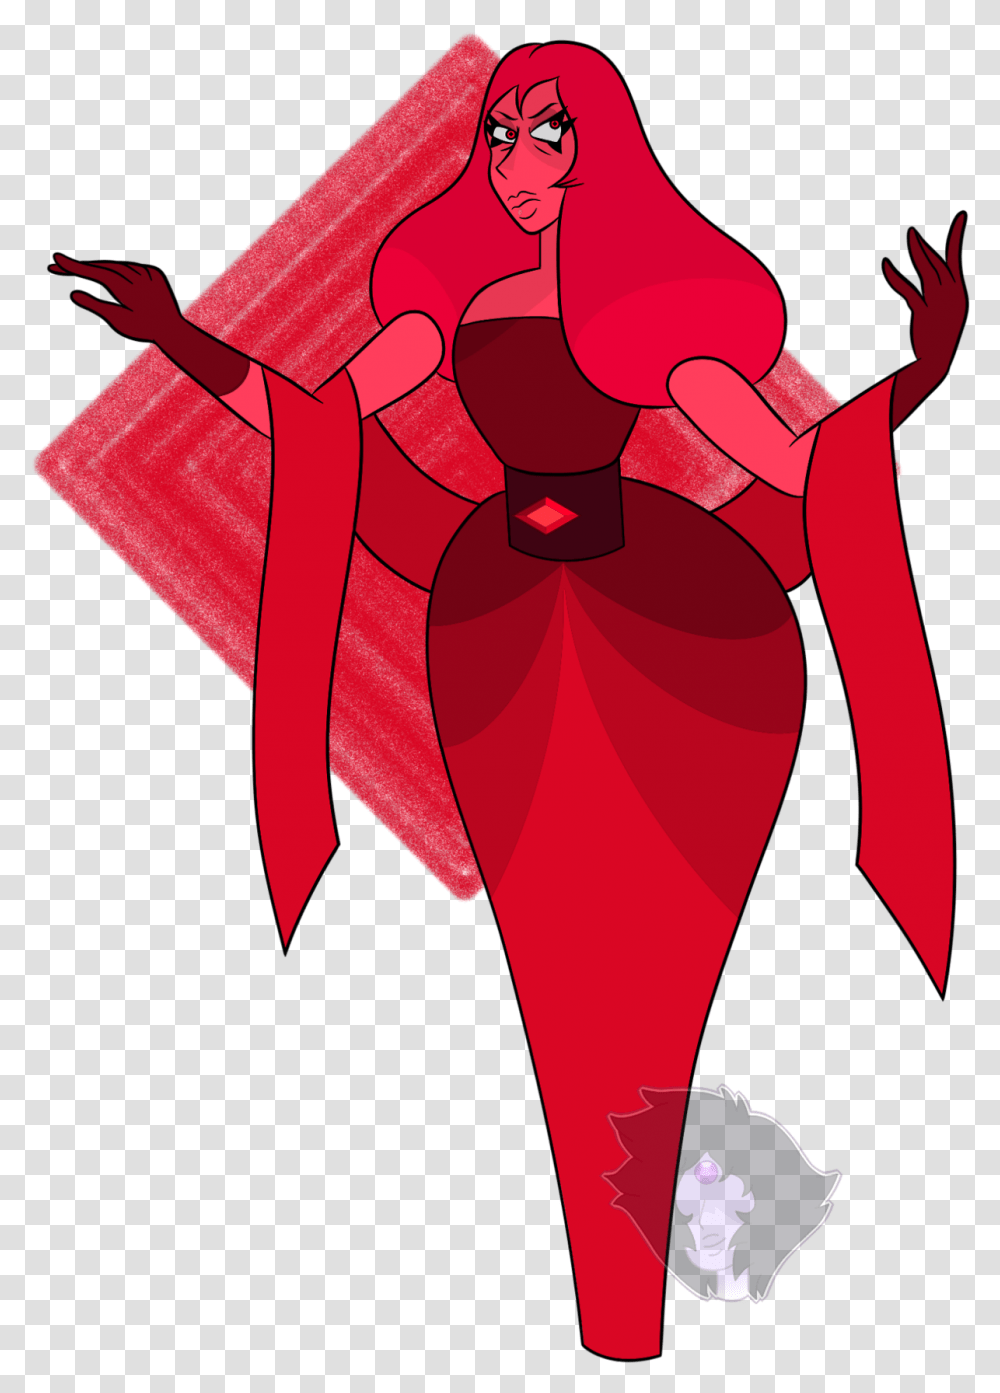 So I Redid My Red Diamond The First One Looked Too Steven Universe Possible Diamond, Flower Transparent Png